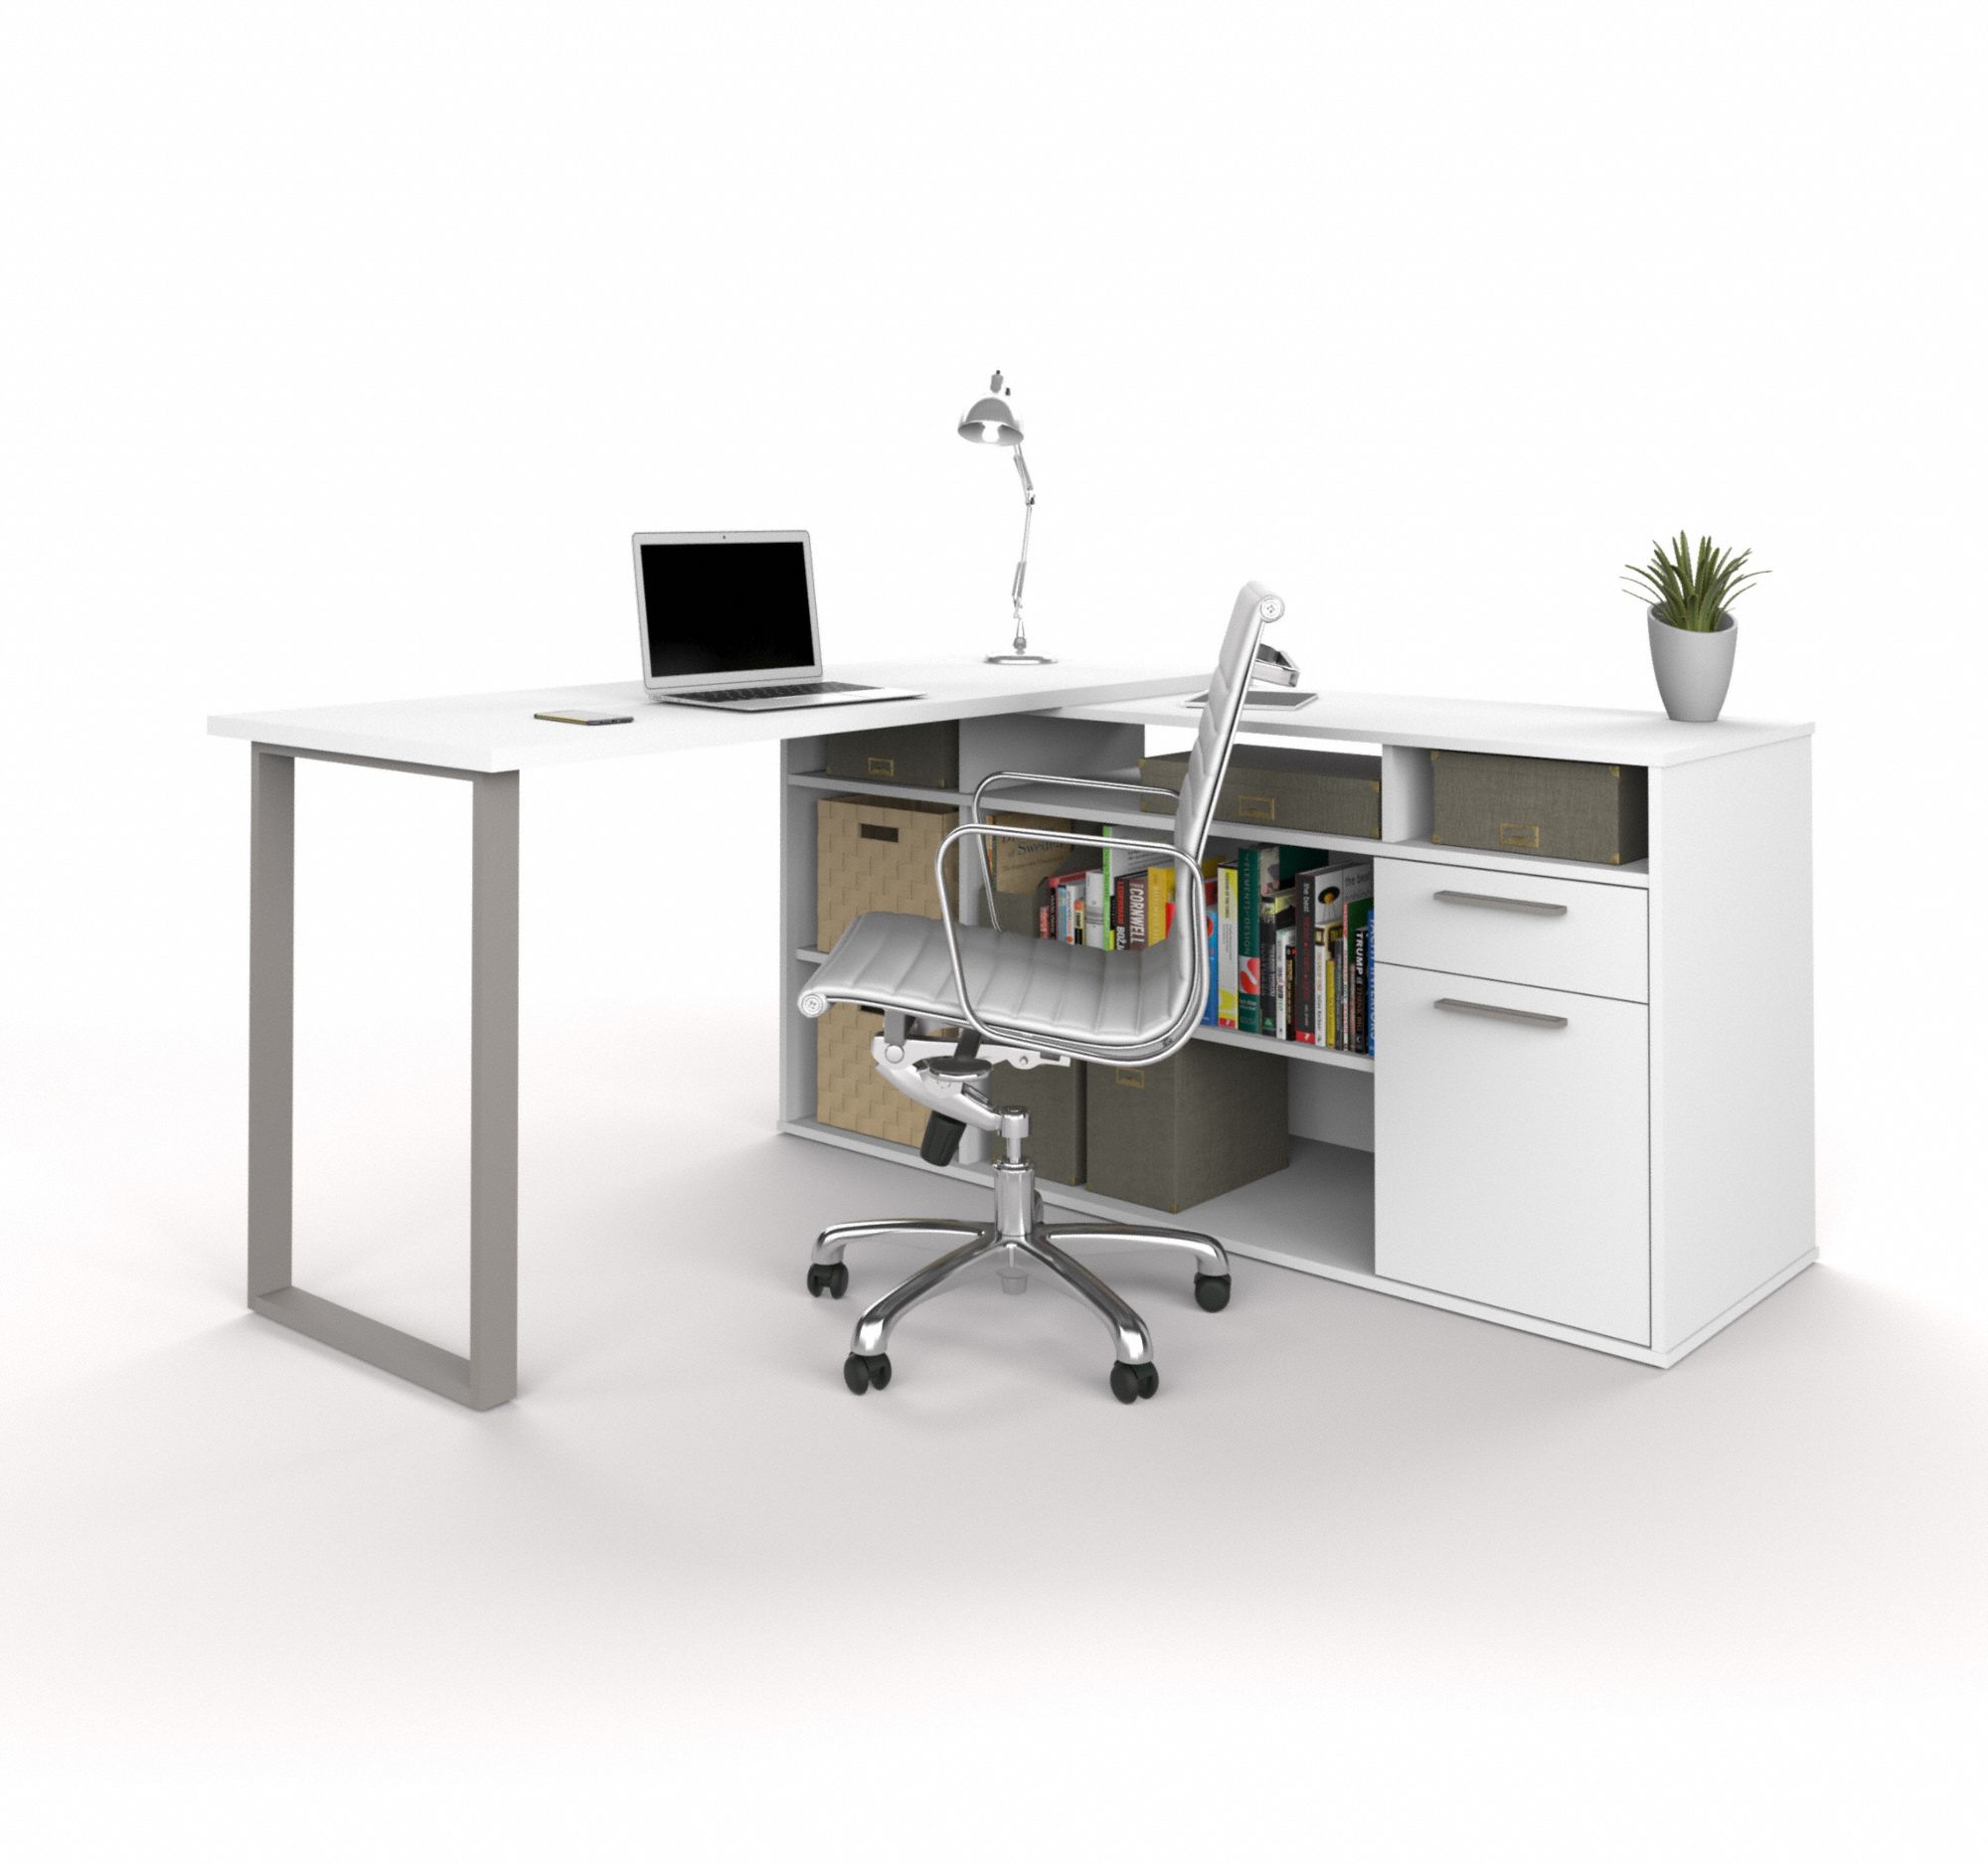 L-Shape Desk: Solay Series, 59 1/4 in Overall Wd, 29 45/64 in Overall Ht, White, White